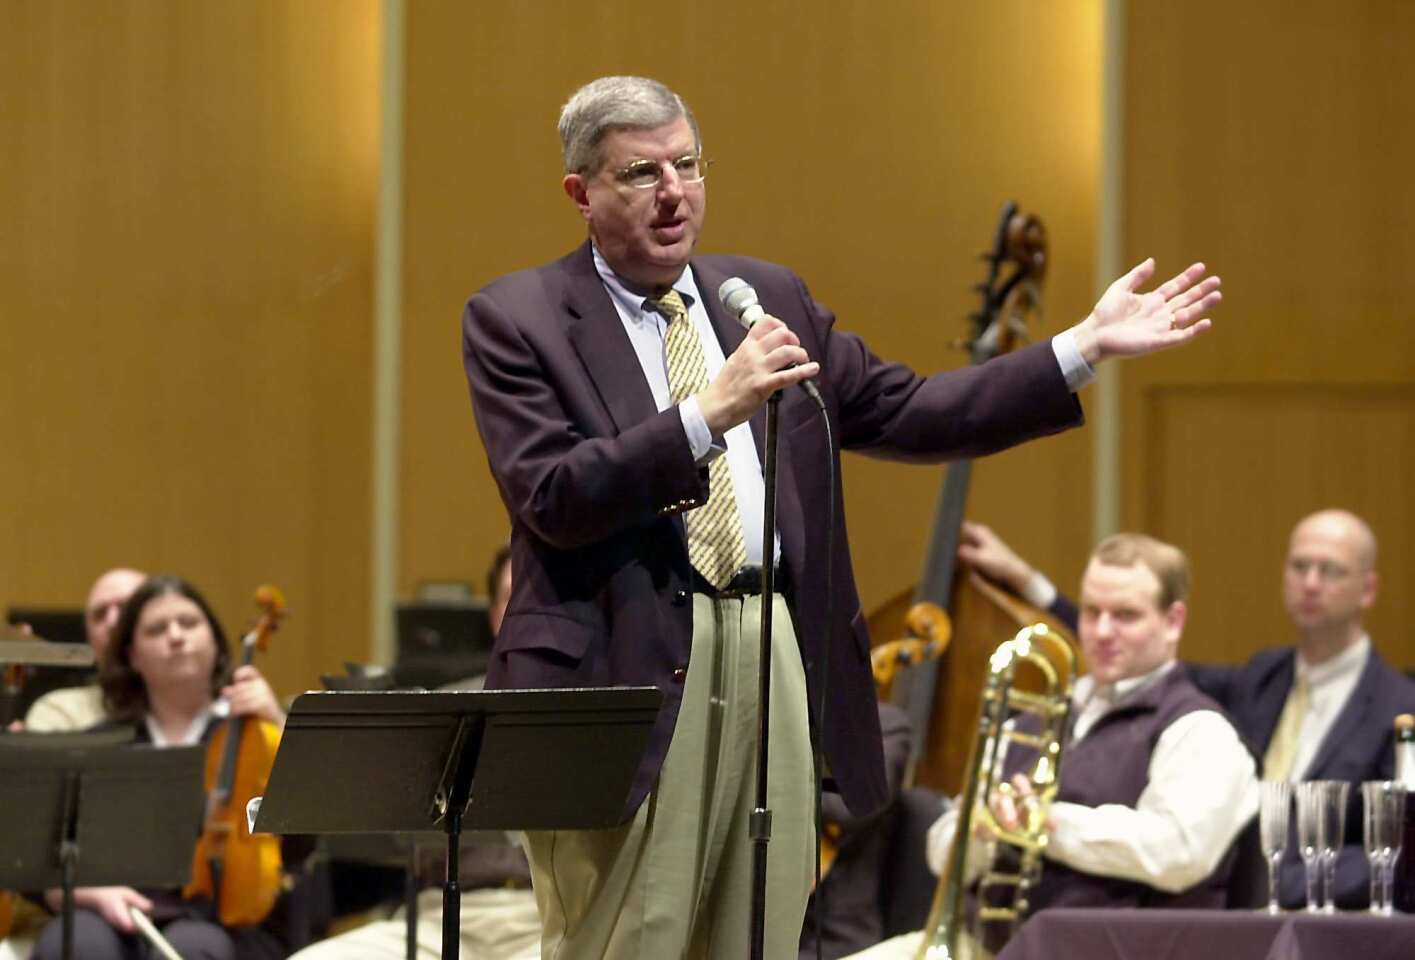 Marvin Hamlisch talks to the audience after being appointed principal pops conductor for the Buffalo Philharmonic in Buffalo, N.Y., in 2003.